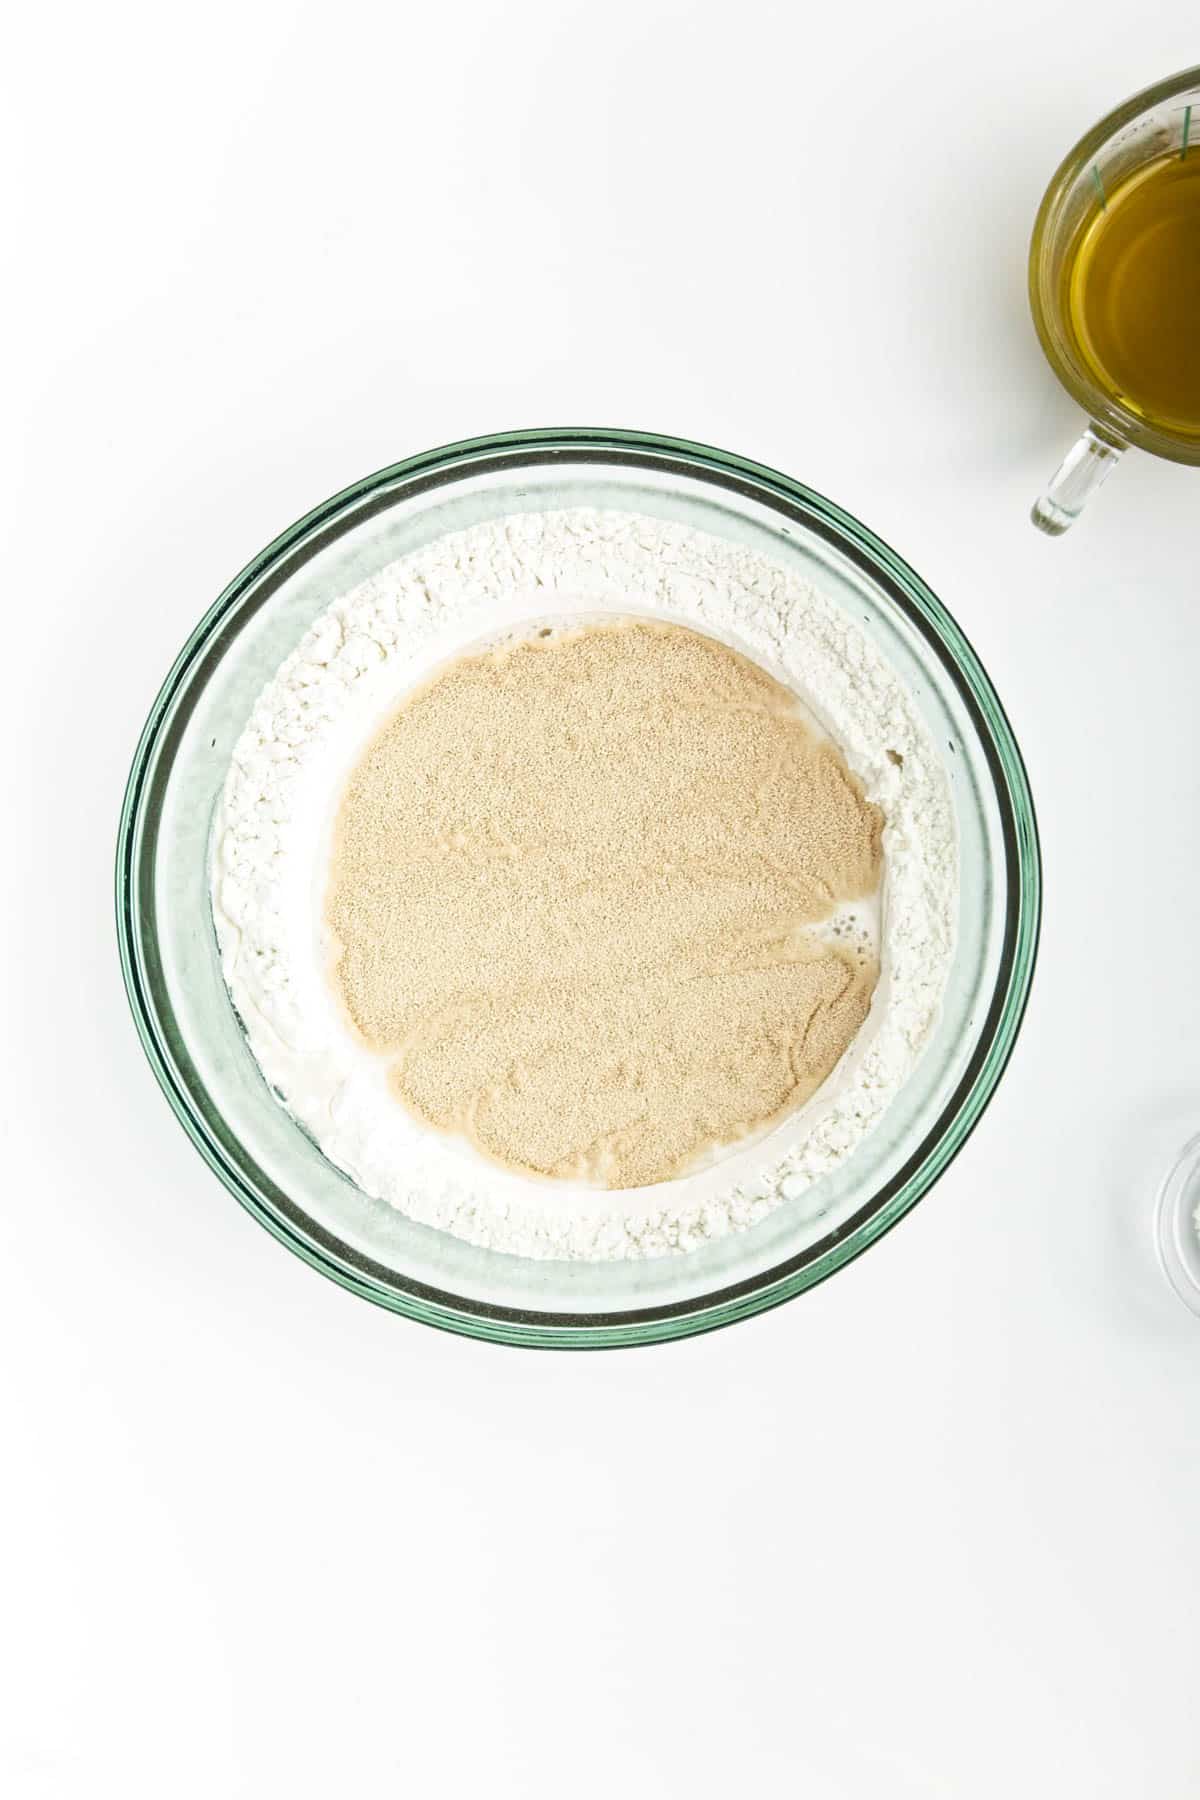 Flour, water, and yeast in a glass bowl.